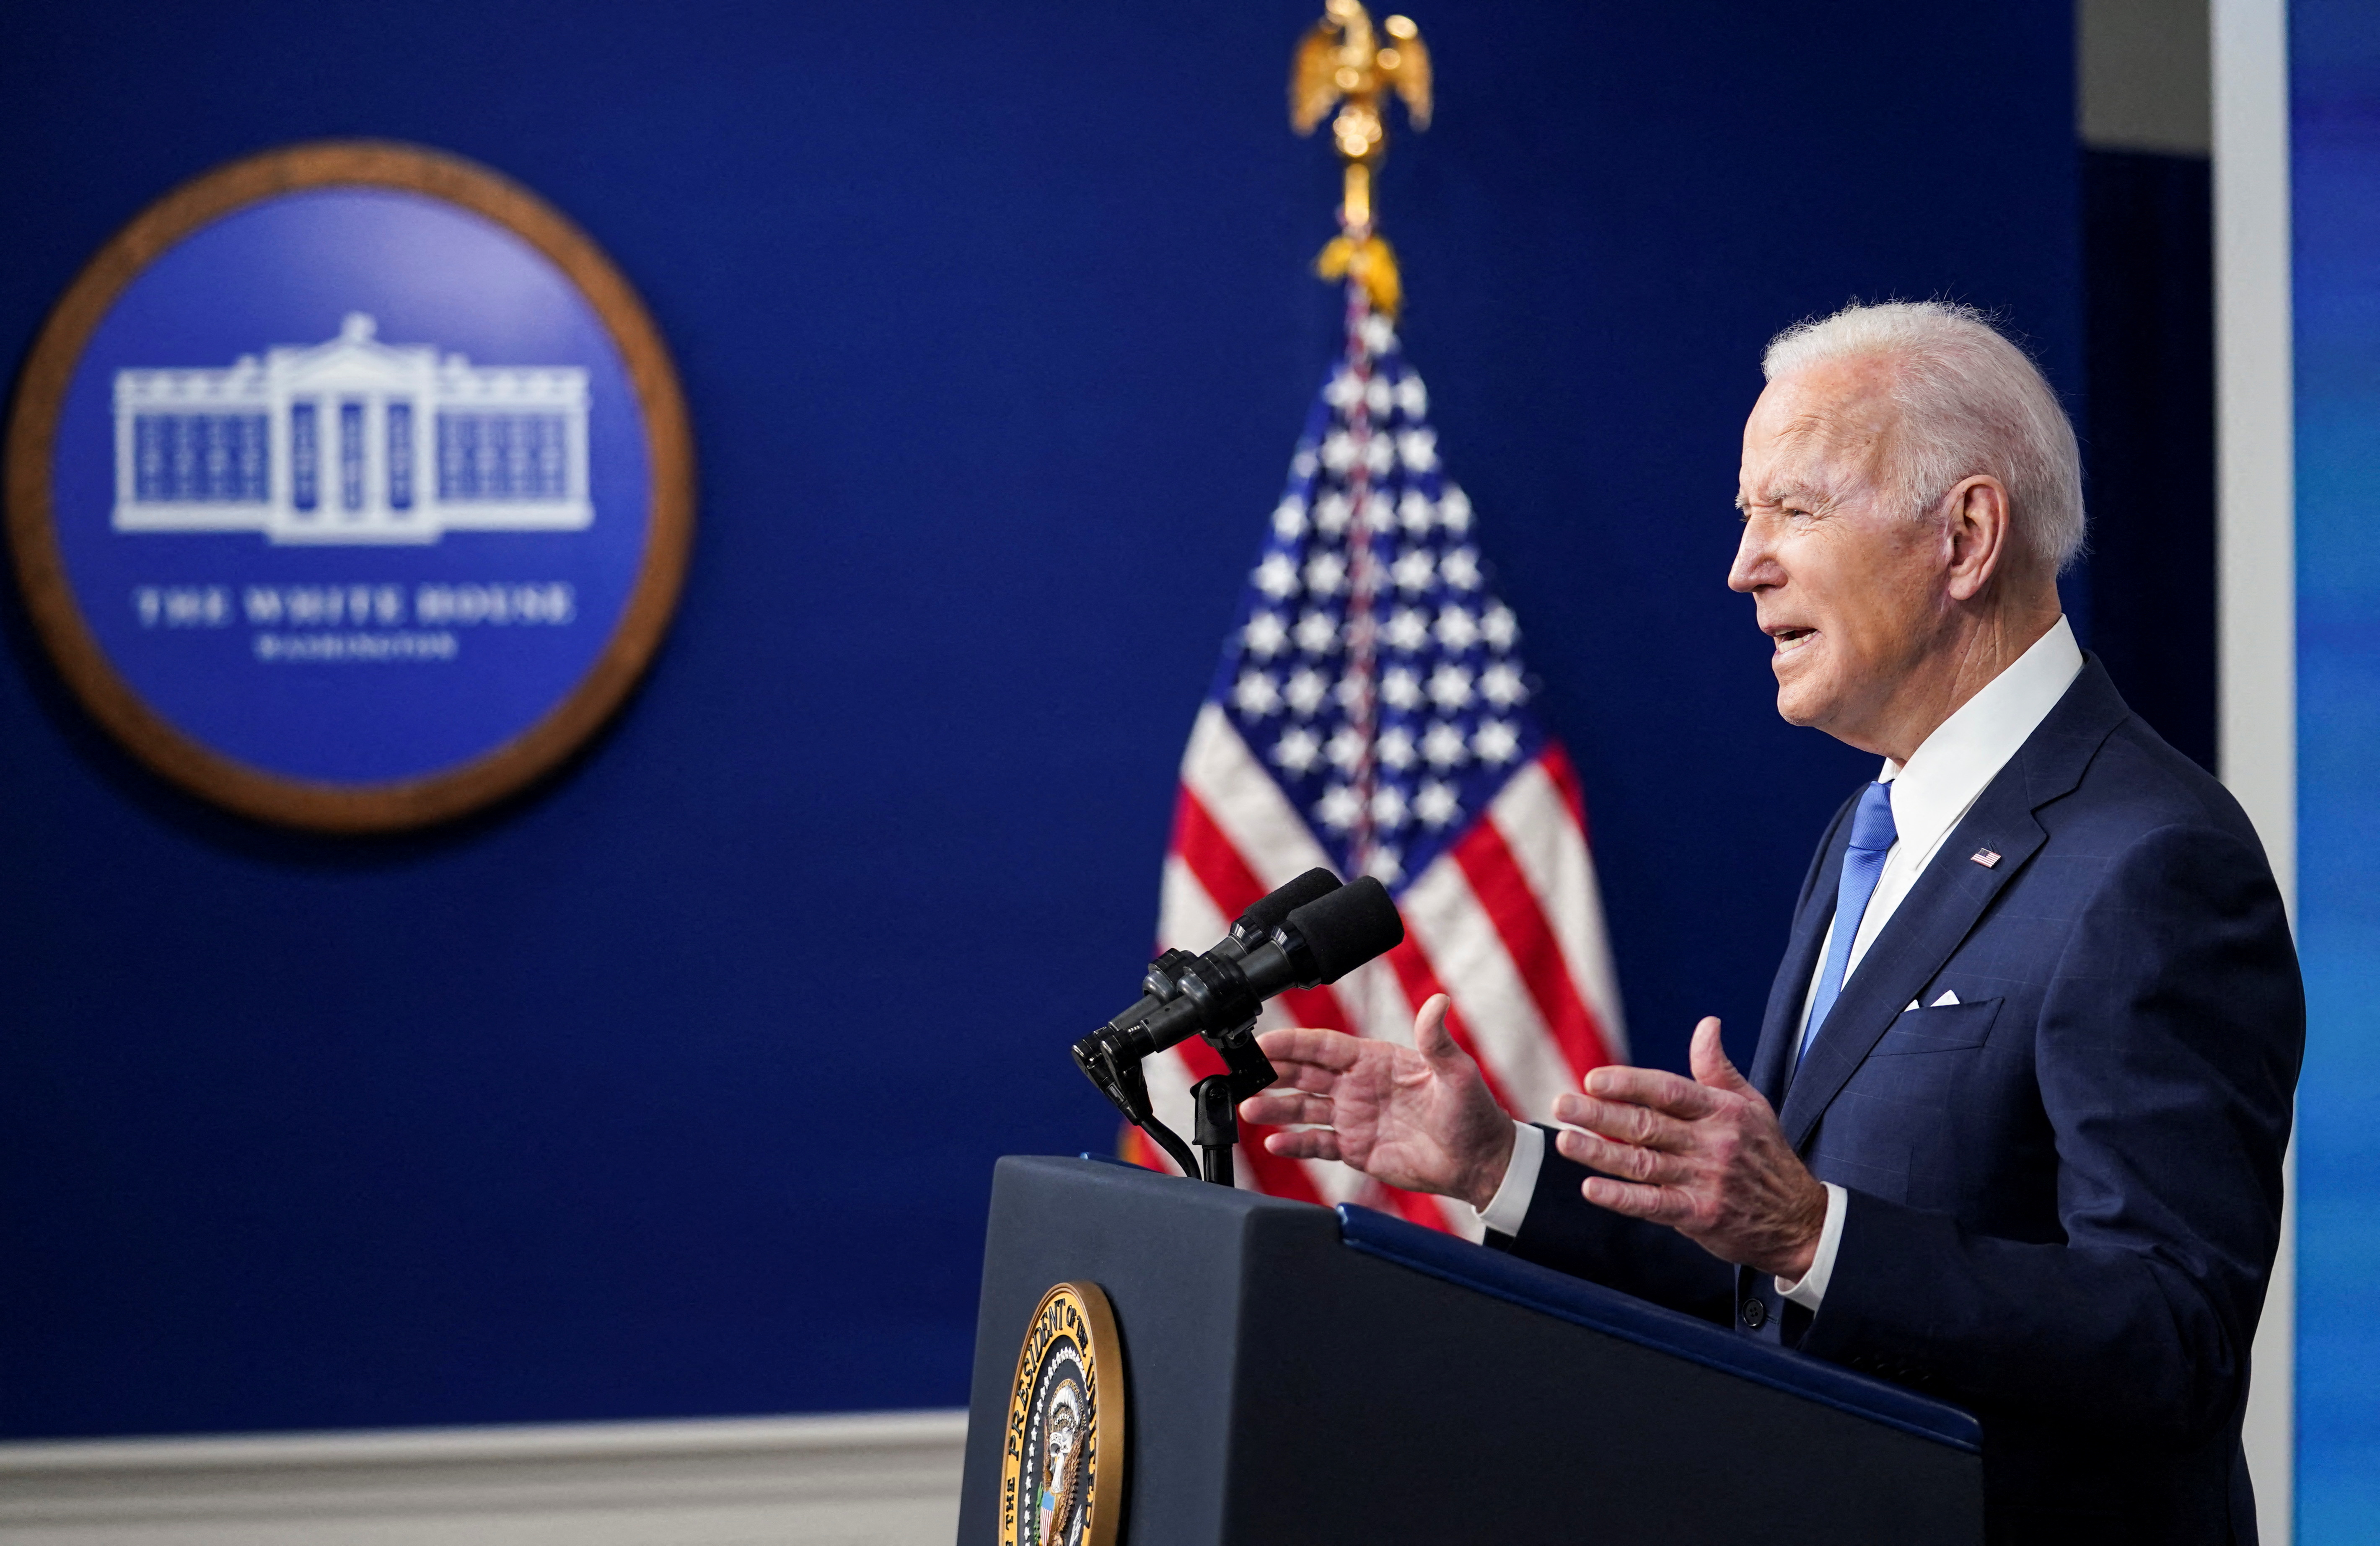 U.S. President Biden speaks about Bipartisan Infrastructure Law at the White House in Washington